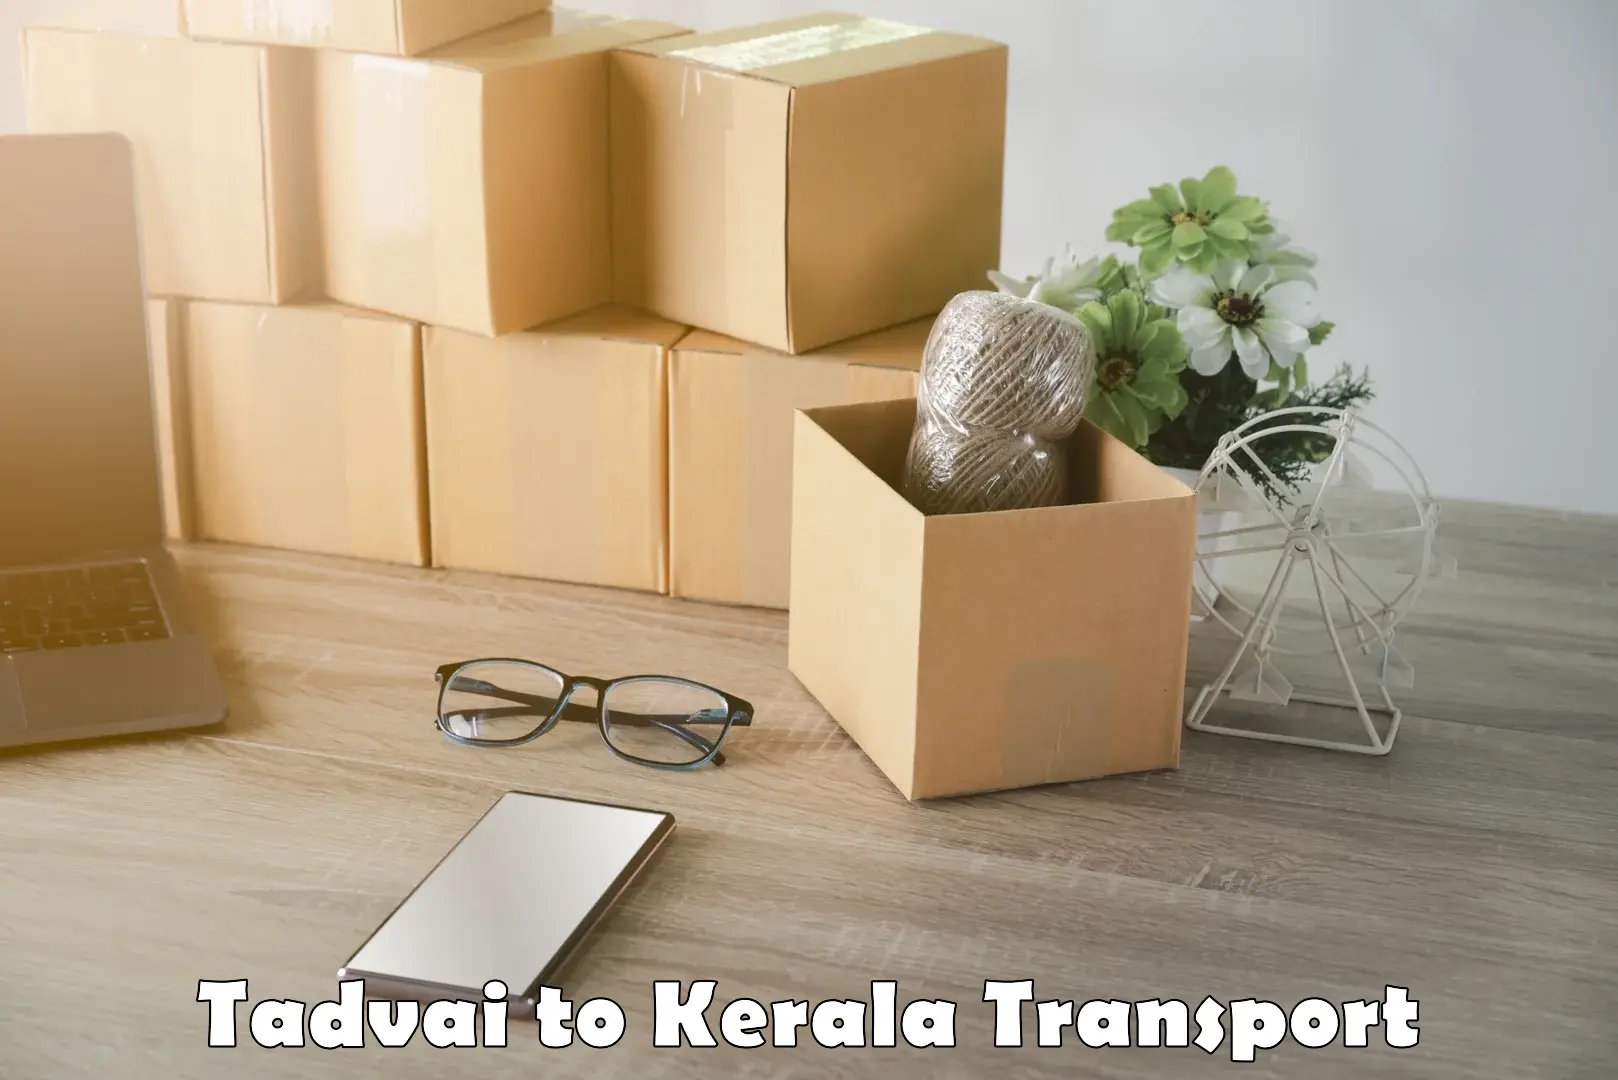 Container transport service Tadvai to Pathanamthitta